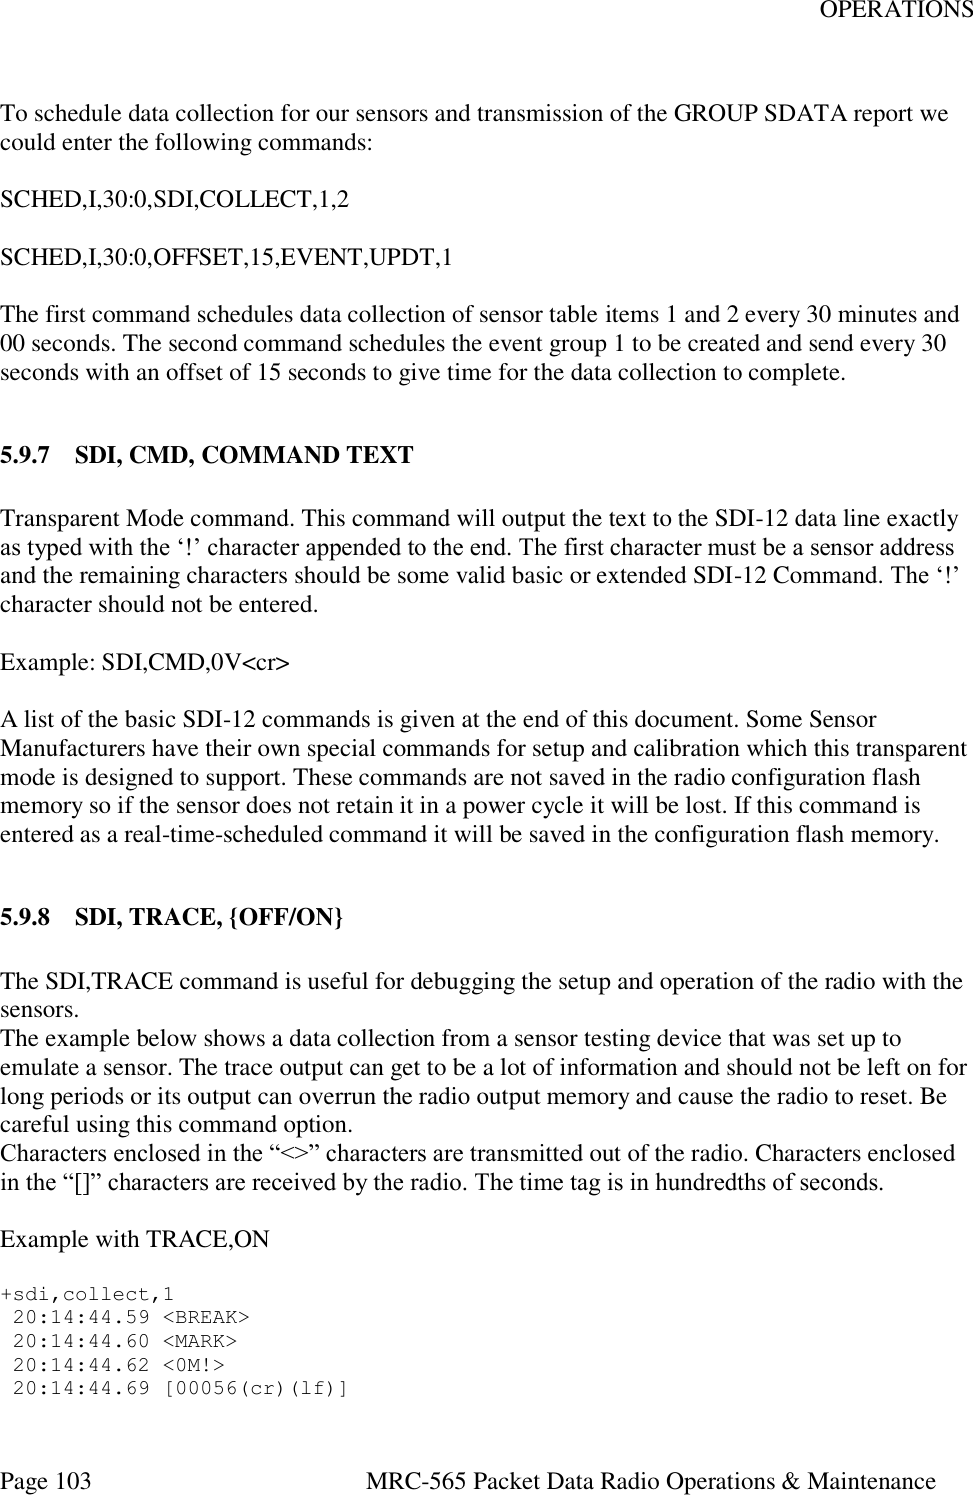 OPERATIONS Page 103  MRC-565 Packet Data Radio Operations &amp; Maintenance  To schedule data collection for our sensors and transmission of the GROUP SDATA report we could enter the following commands:  SCHED,I,30:0,SDI,COLLECT,1,2  SCHED,I,30:0,OFFSET,15,EVENT,UPDT,1  The first command schedules data collection of sensor table items 1 and 2 every 30 minutes and 00 seconds. The second command schedules the event group 1 to be created and send every 30 seconds with an offset of 15 seconds to give time for the data collection to complete.  5.9.7 SDI, CMD, COMMAND TEXT  Transparent Mode command. This command will output the text to the SDI-12 data line exactly as typed with the ‘!’ character appended to the end. The first character must be a sensor address and the remaining characters should be some valid basic or extended SDI-12 Command. The ‘!’ character should not be entered.  Example: SDI,CMD,0V&lt;cr&gt;  A list of the basic SDI-12 commands is given at the end of this document. Some Sensor Manufacturers have their own special commands for setup and calibration which this transparent mode is designed to support. These commands are not saved in the radio configuration flash memory so if the sensor does not retain it in a power cycle it will be lost. If this command is entered as a real-time-scheduled command it will be saved in the configuration flash memory.  5.9.8 SDI, TRACE, {OFF/ON}  The SDI,TRACE command is useful for debugging the setup and operation of the radio with the sensors. The example below shows a data collection from a sensor testing device that was set up to emulate a sensor. The trace output can get to be a lot of information and should not be left on for long periods or its output can overrun the radio output memory and cause the radio to reset. Be careful using this command option. Characters enclosed in the “&lt;&gt;” characters are transmitted out of the radio. Characters enclosed in the “[]” characters are received by the radio. The time tag is in hundredths of seconds.  Example with TRACE,ON  +sdi,collect,1  20:14:44.59 &lt;BREAK&gt;  20:14:44.60 &lt;MARK&gt;  20:14:44.62 &lt;0M!&gt;  20:14:44.69 [00056(cr)(lf)] 